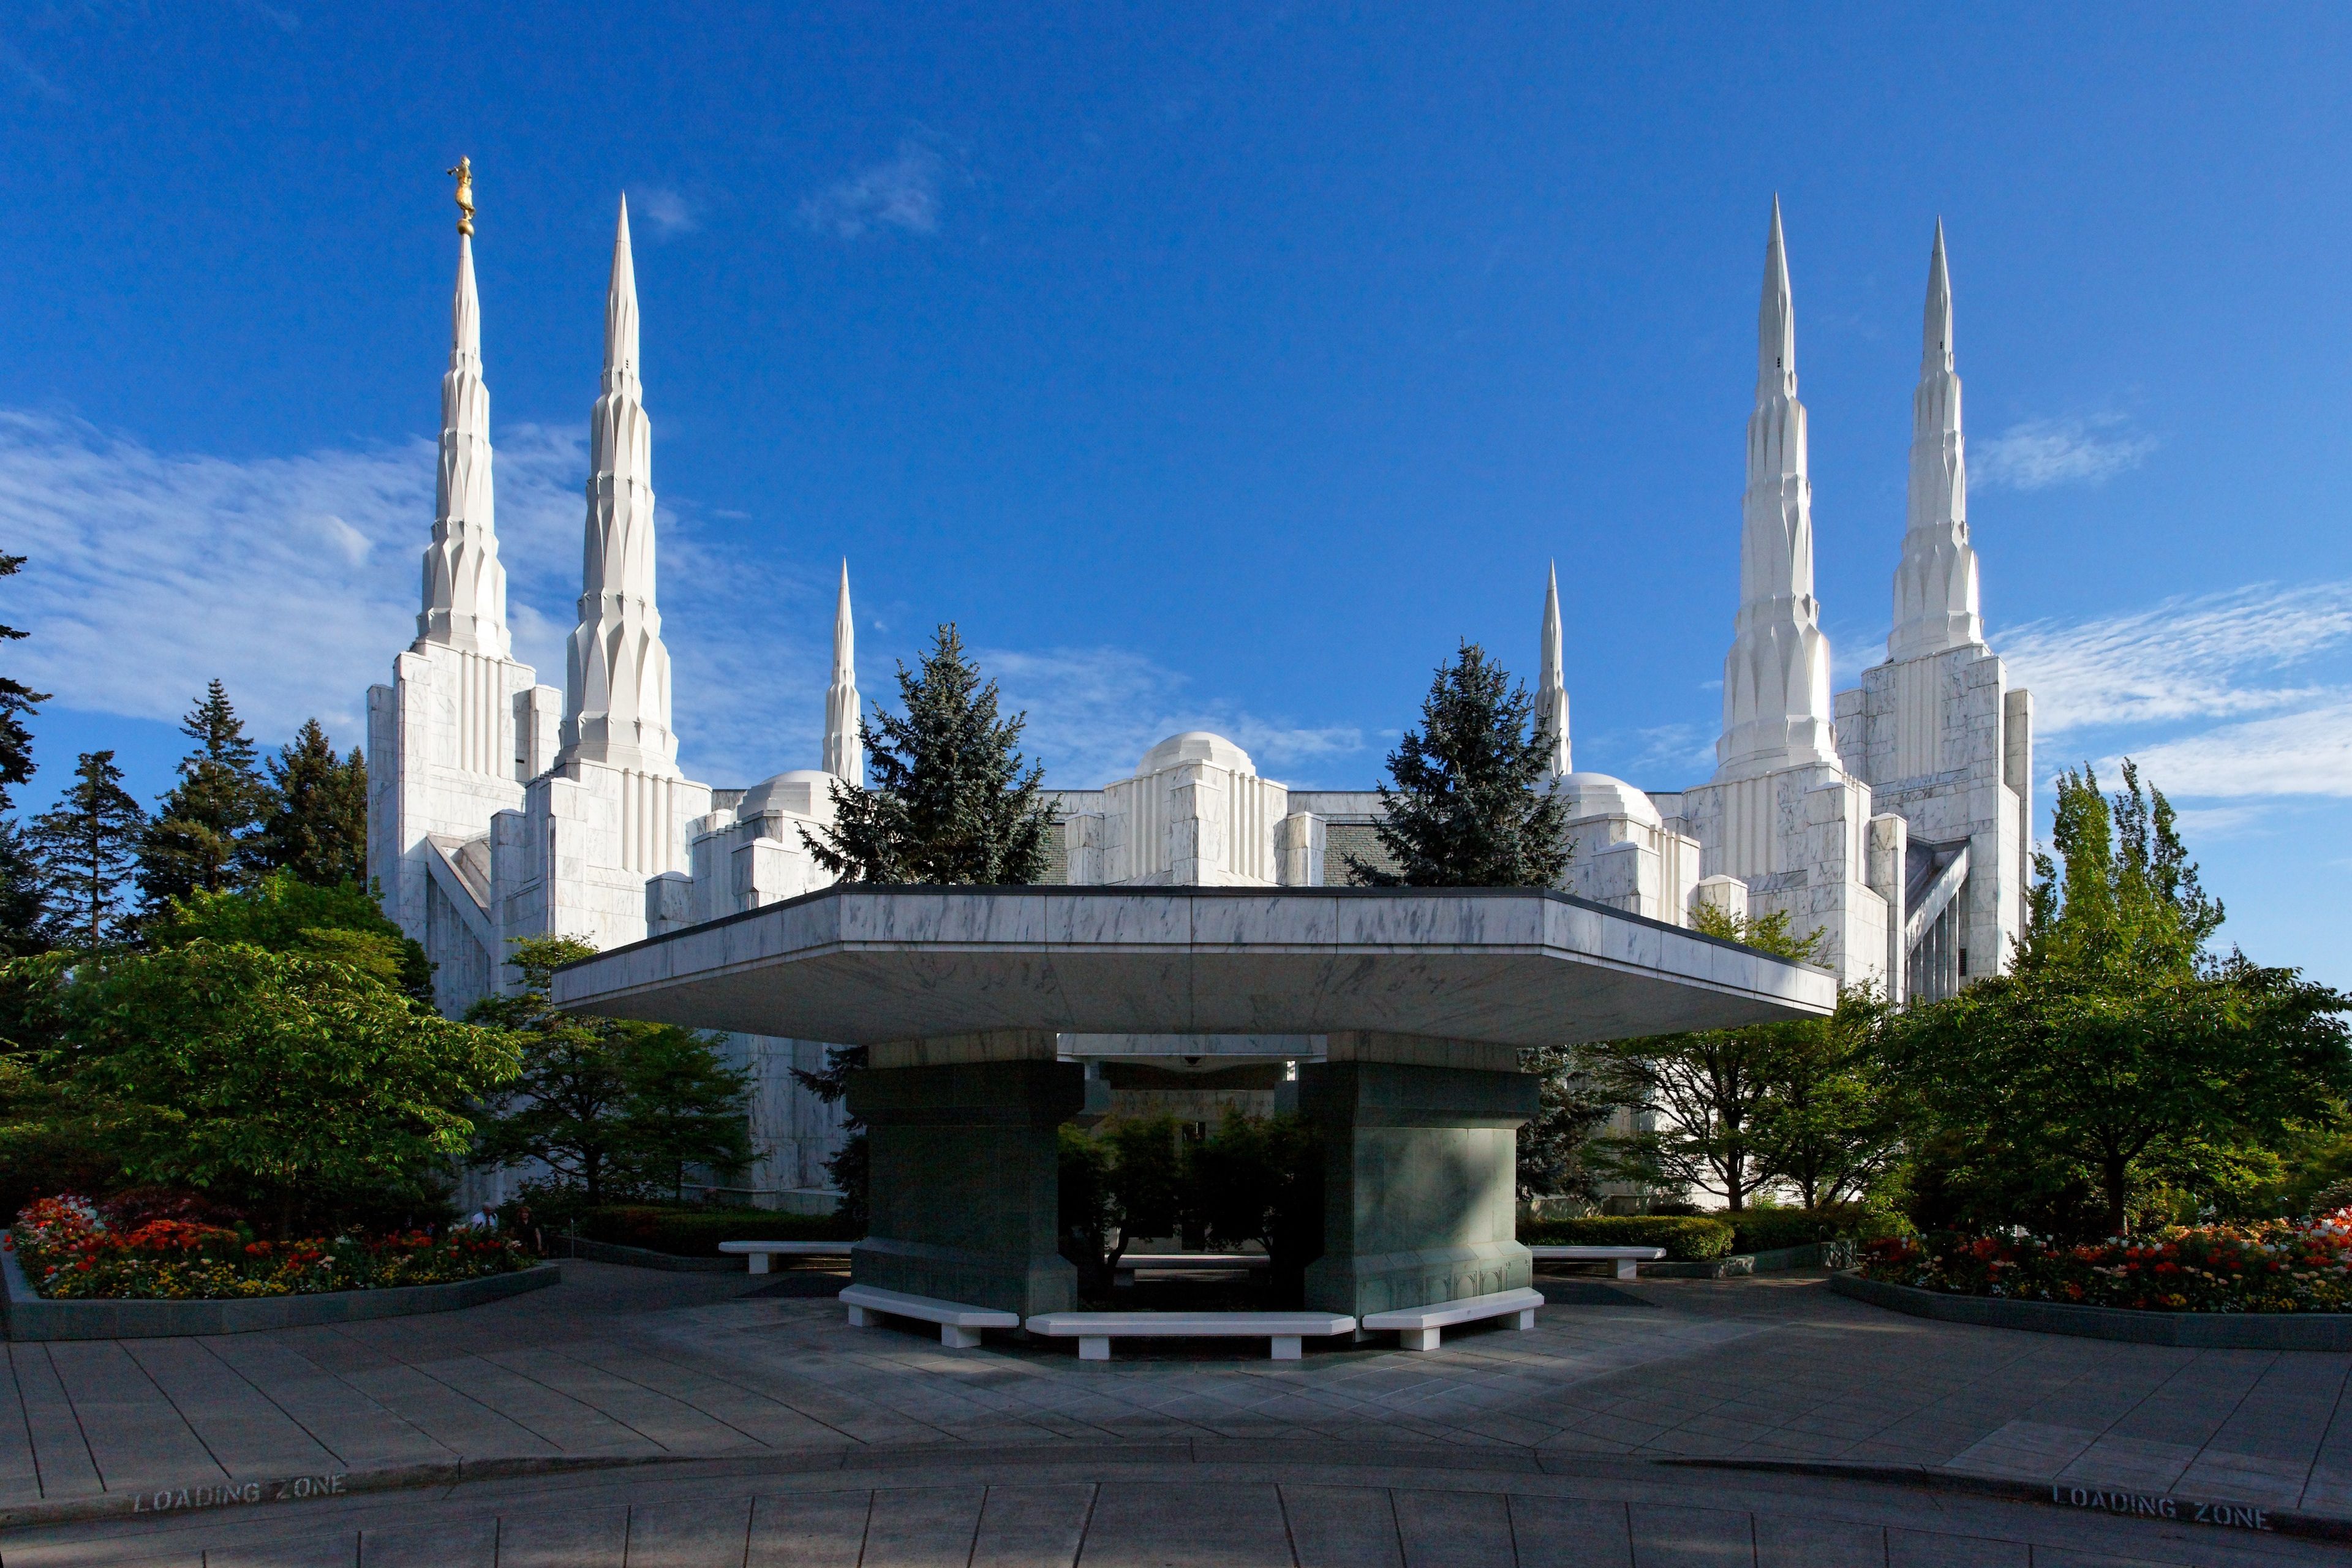 The entire Portland Oregon Temple, including the entrance and scenery.